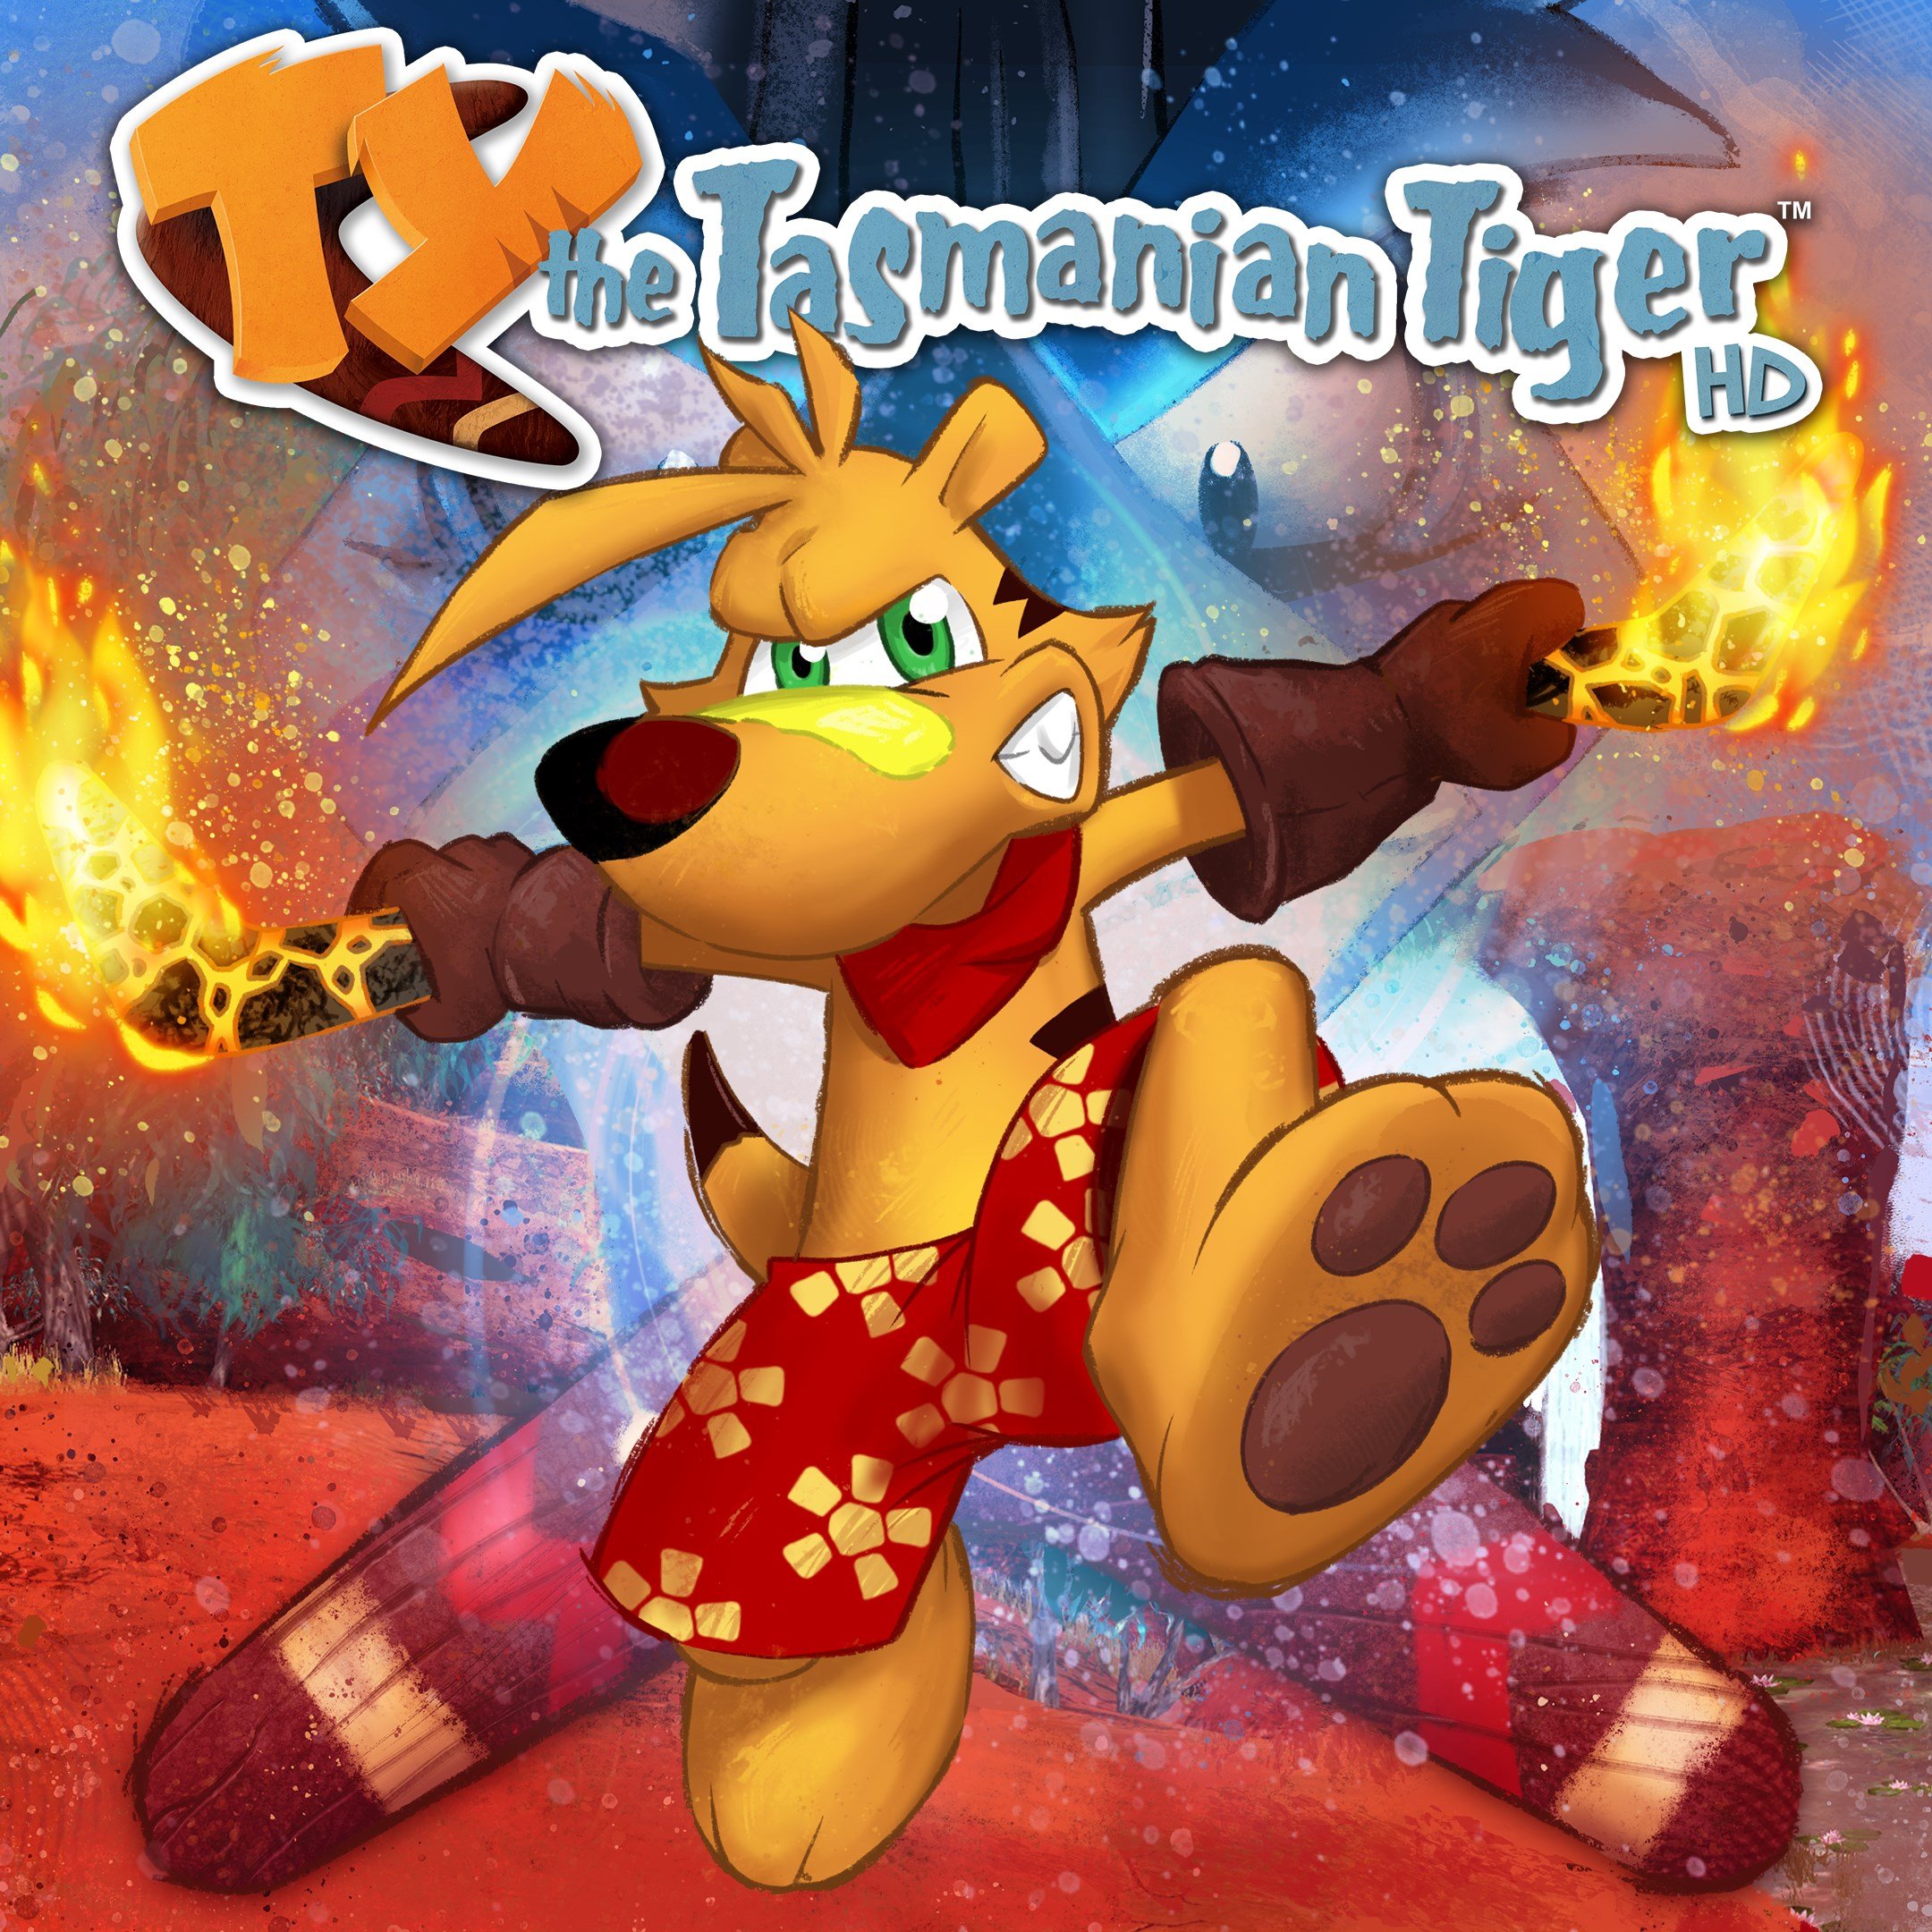 Boxart for TY the Tasmanian Tiger HD